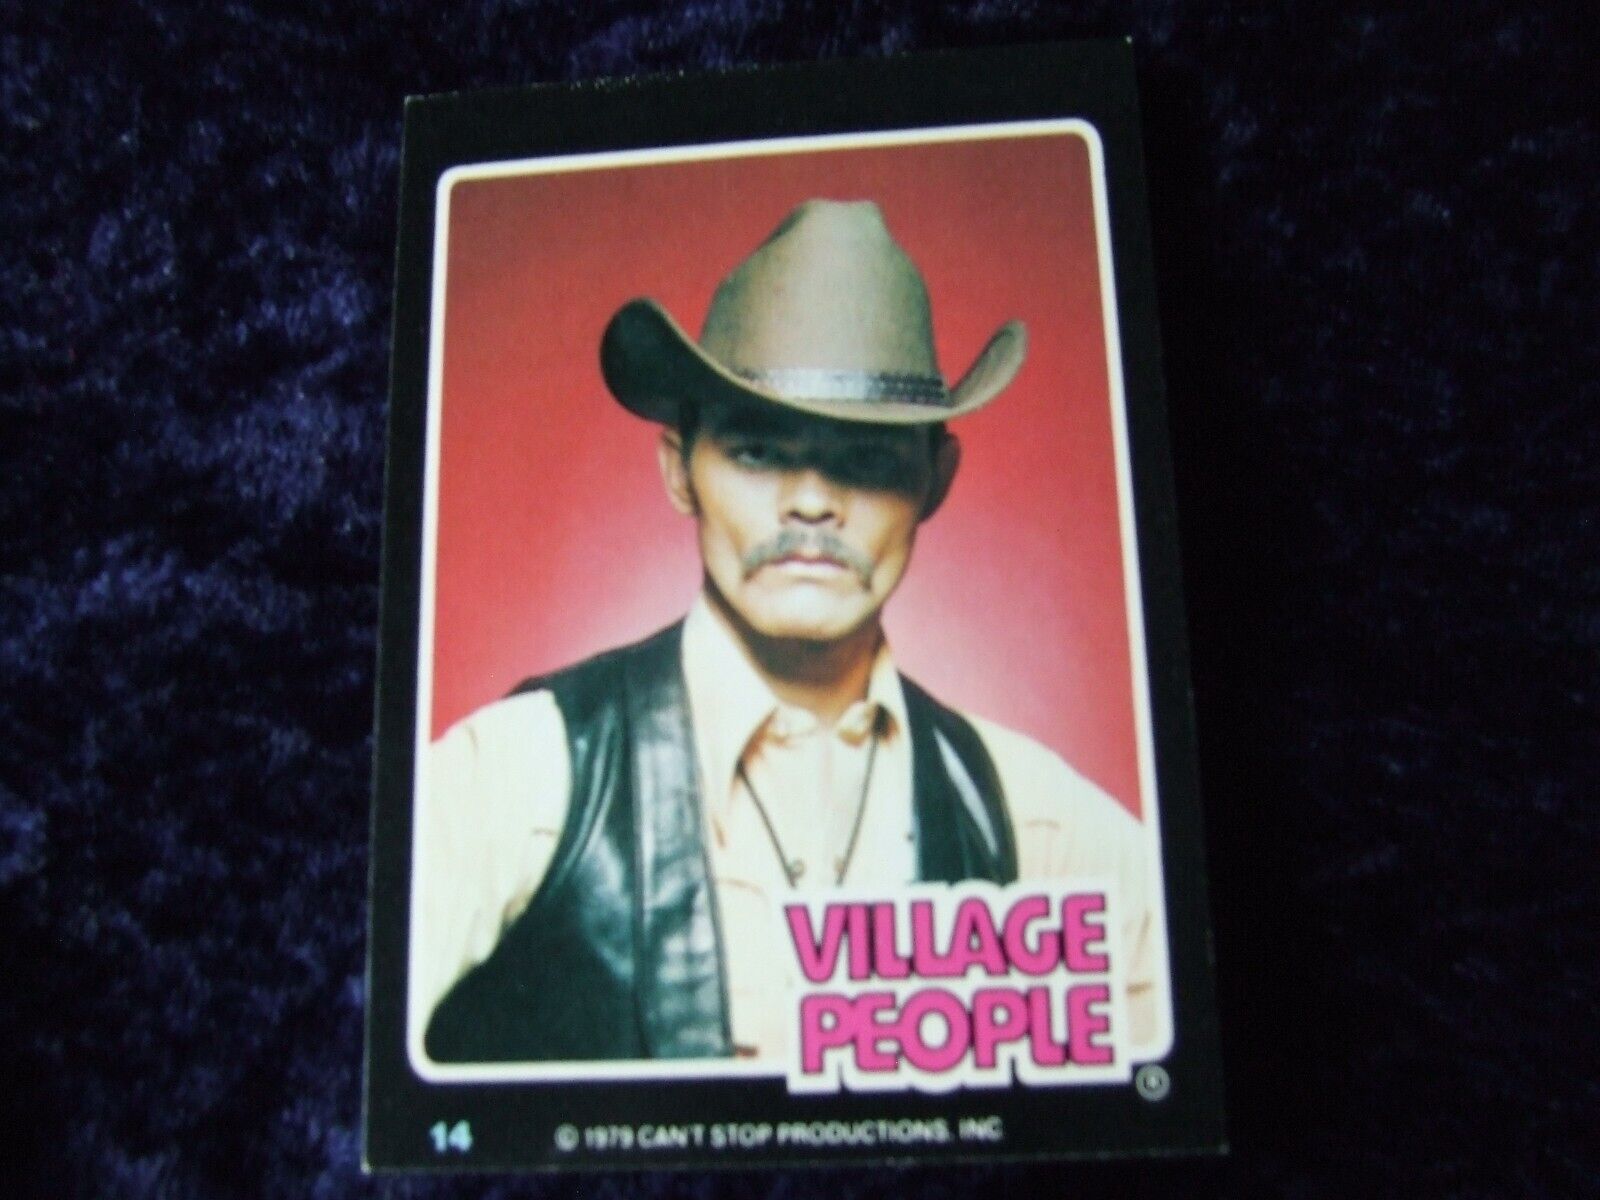 1979 Randy Jones Village People Cowboy Trading Card #14 - Can't Stop Productions